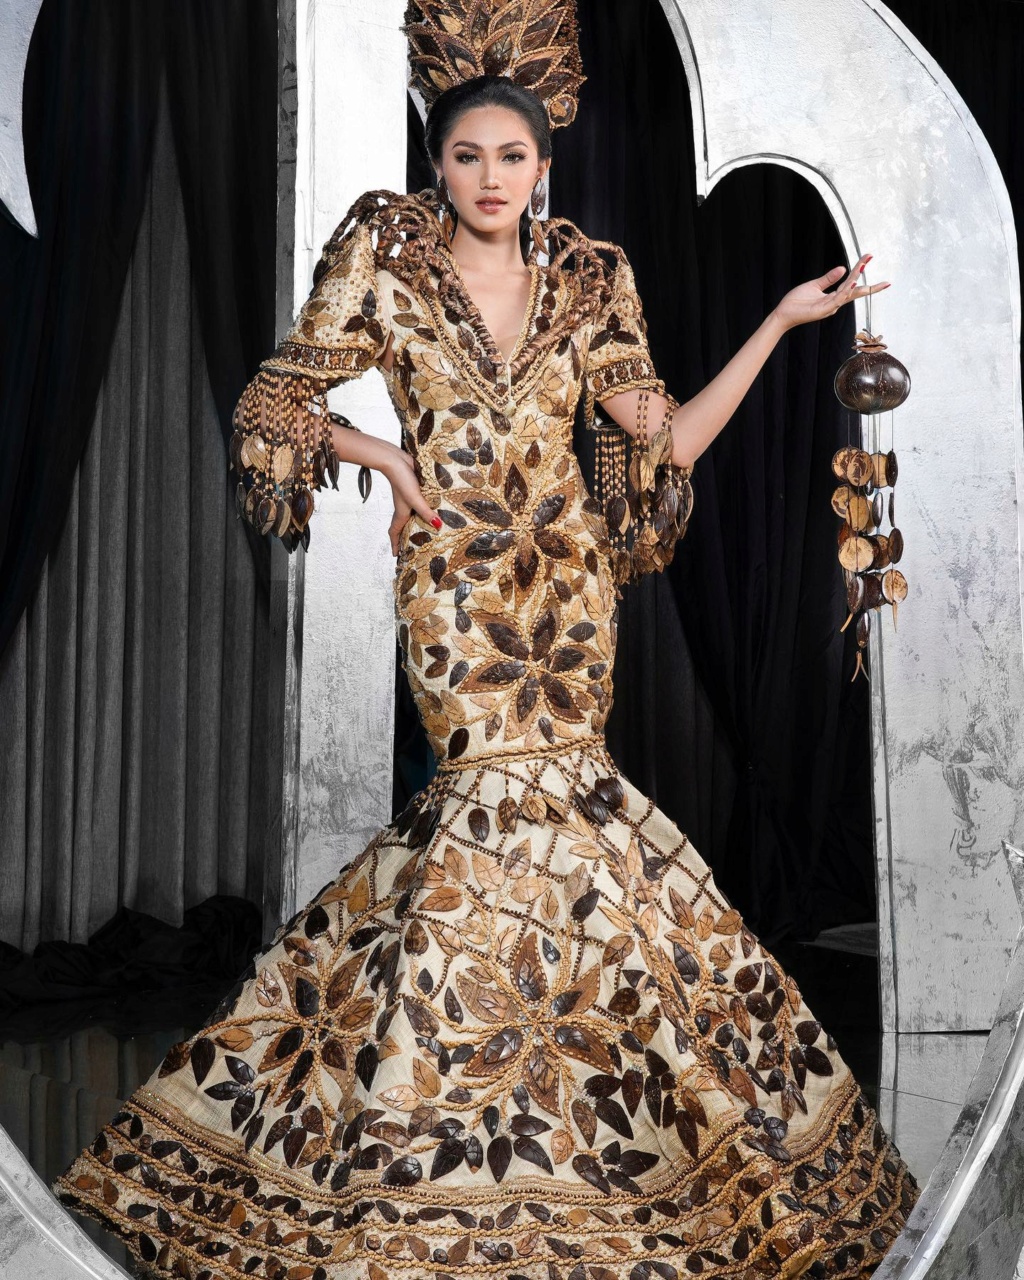 Miss World Philippines 2021 @ National Costume Portrait - Page 2 22188510